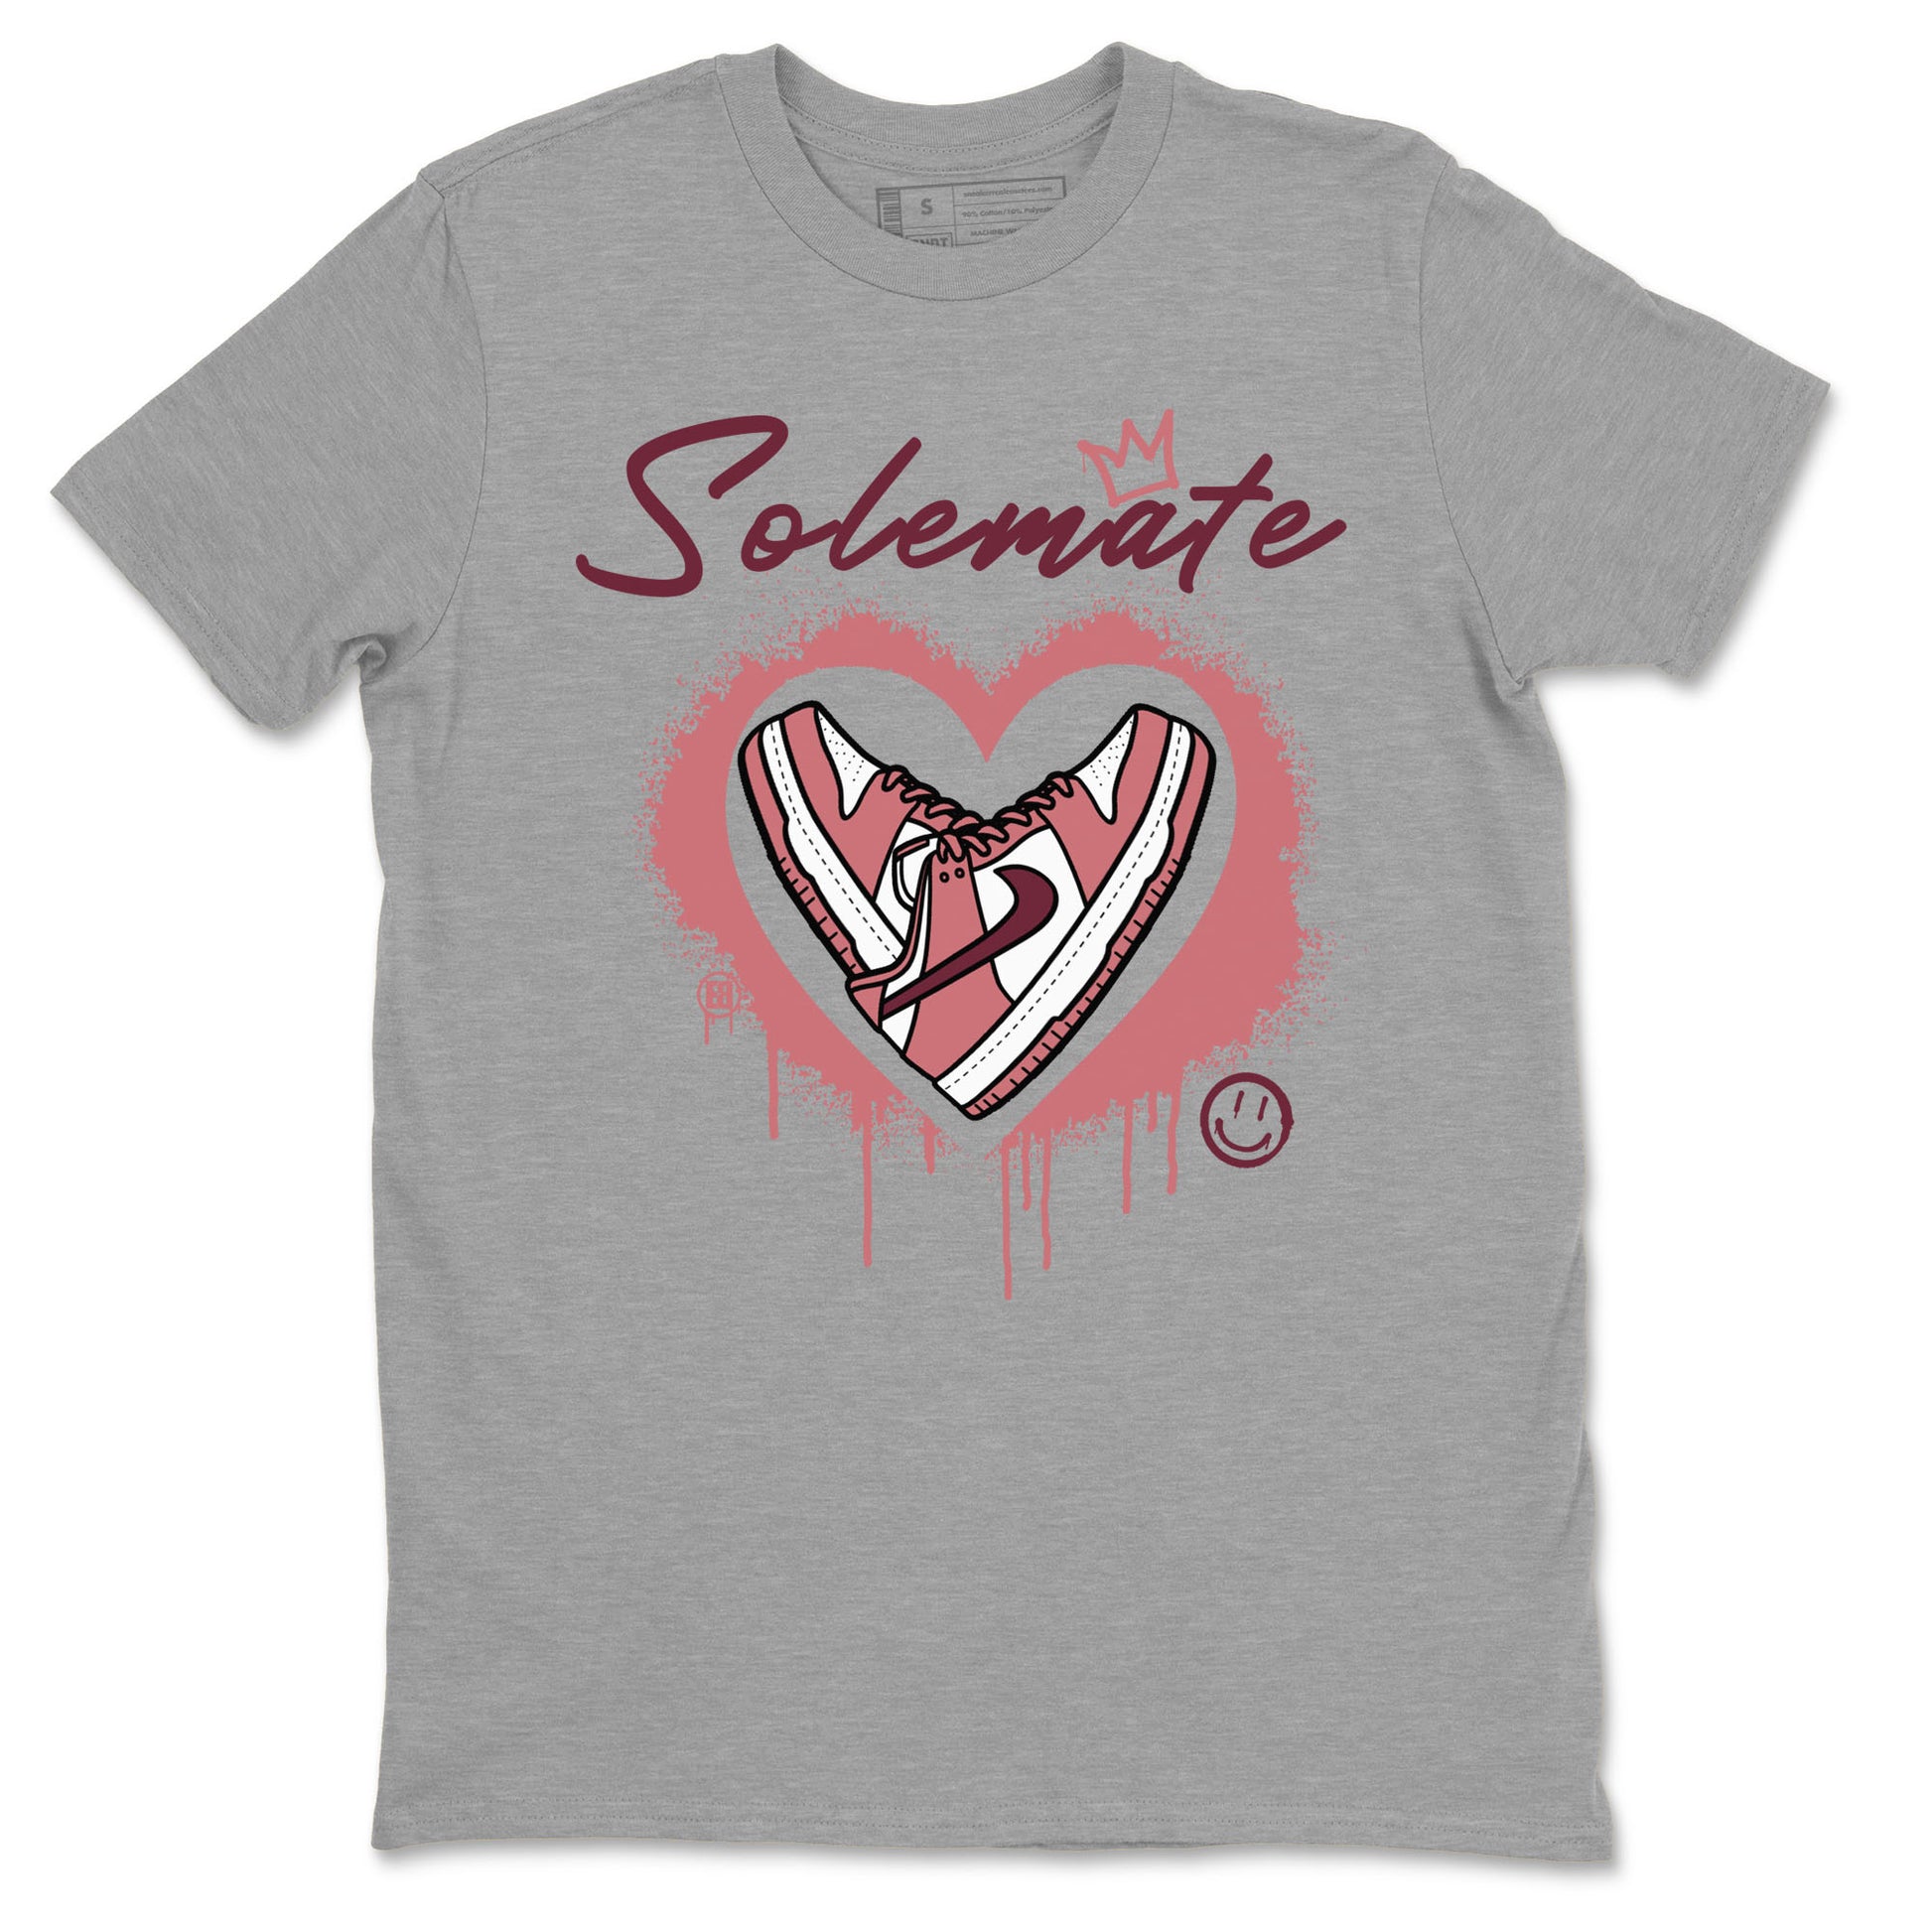 Solemate sneaker match tees to Dunk Valentine's Day street fashion brand for shirts to match Jordans SNRT Sneaker Tees Dunk Valentine's Day unisex t-shirt Heather Grey 2 unisex shirt